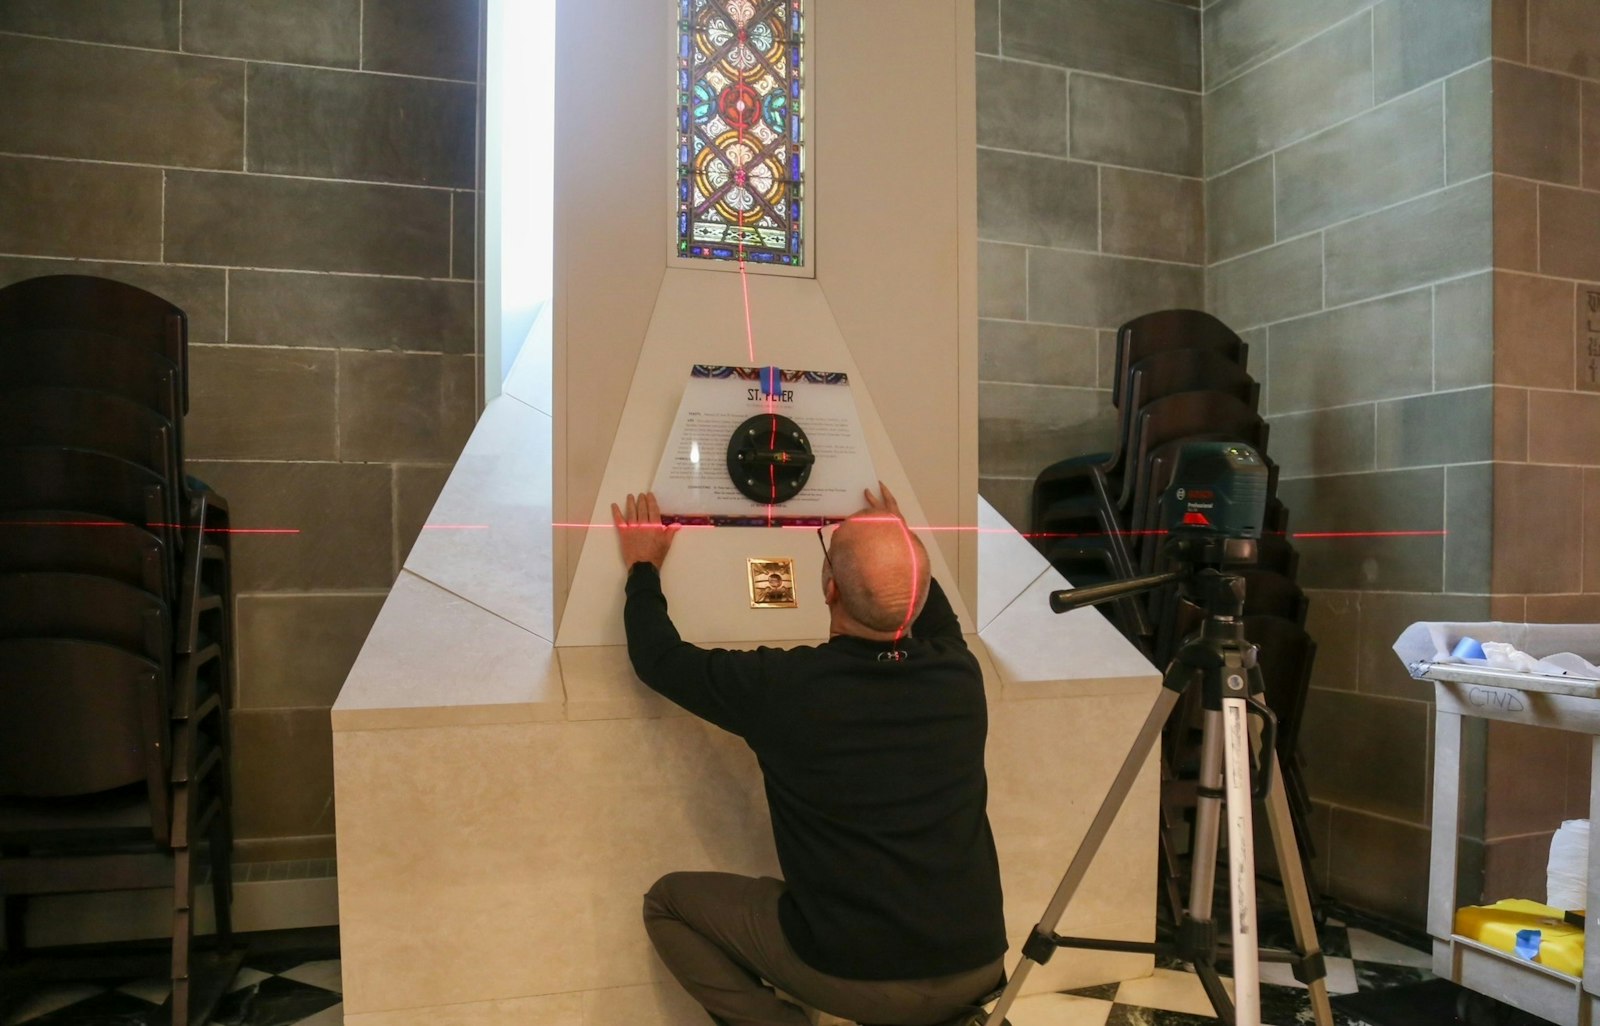 Keith Calleja began installation of relics on Jan. 8, 2024, starting with the relic of St. Philip. Here, he installs a placard above the relic of St. Peter.